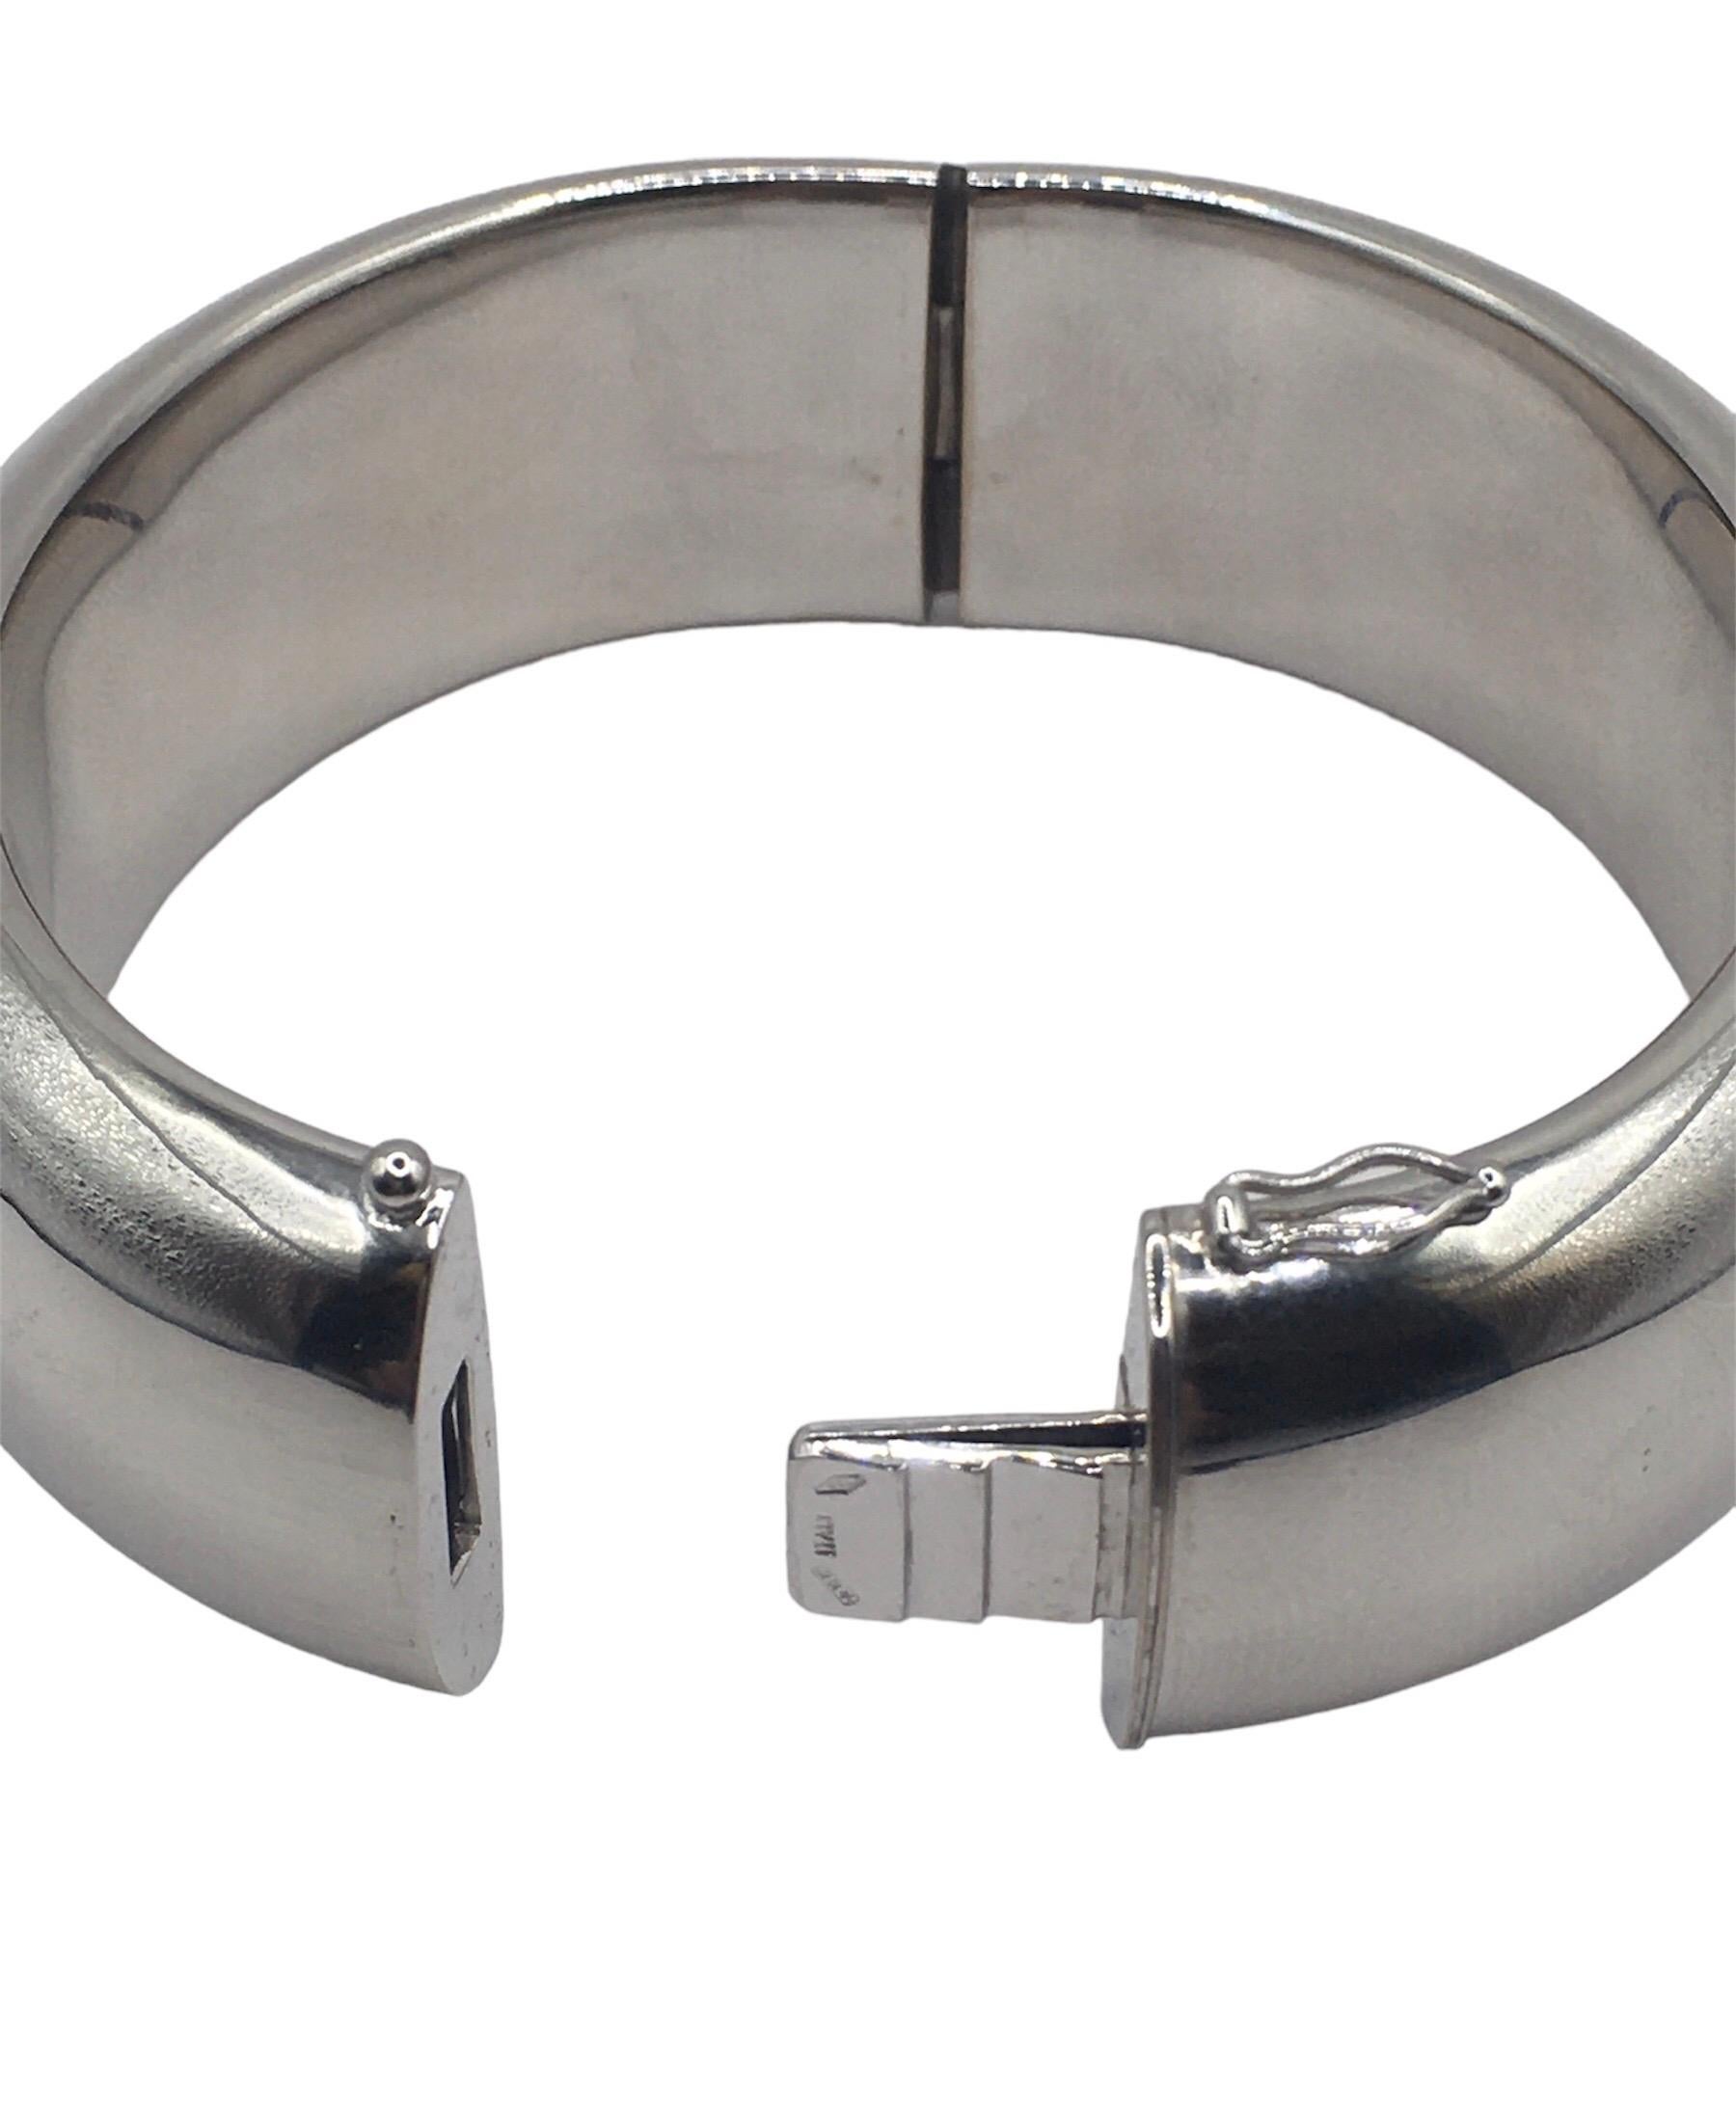 Essence bangle in 18 kt  white gold 
This classic collection in Micheletto tradition 

the total weight of the gold is  gr 70,60

STAMP: 10 MI ITALY 750

The full set is available